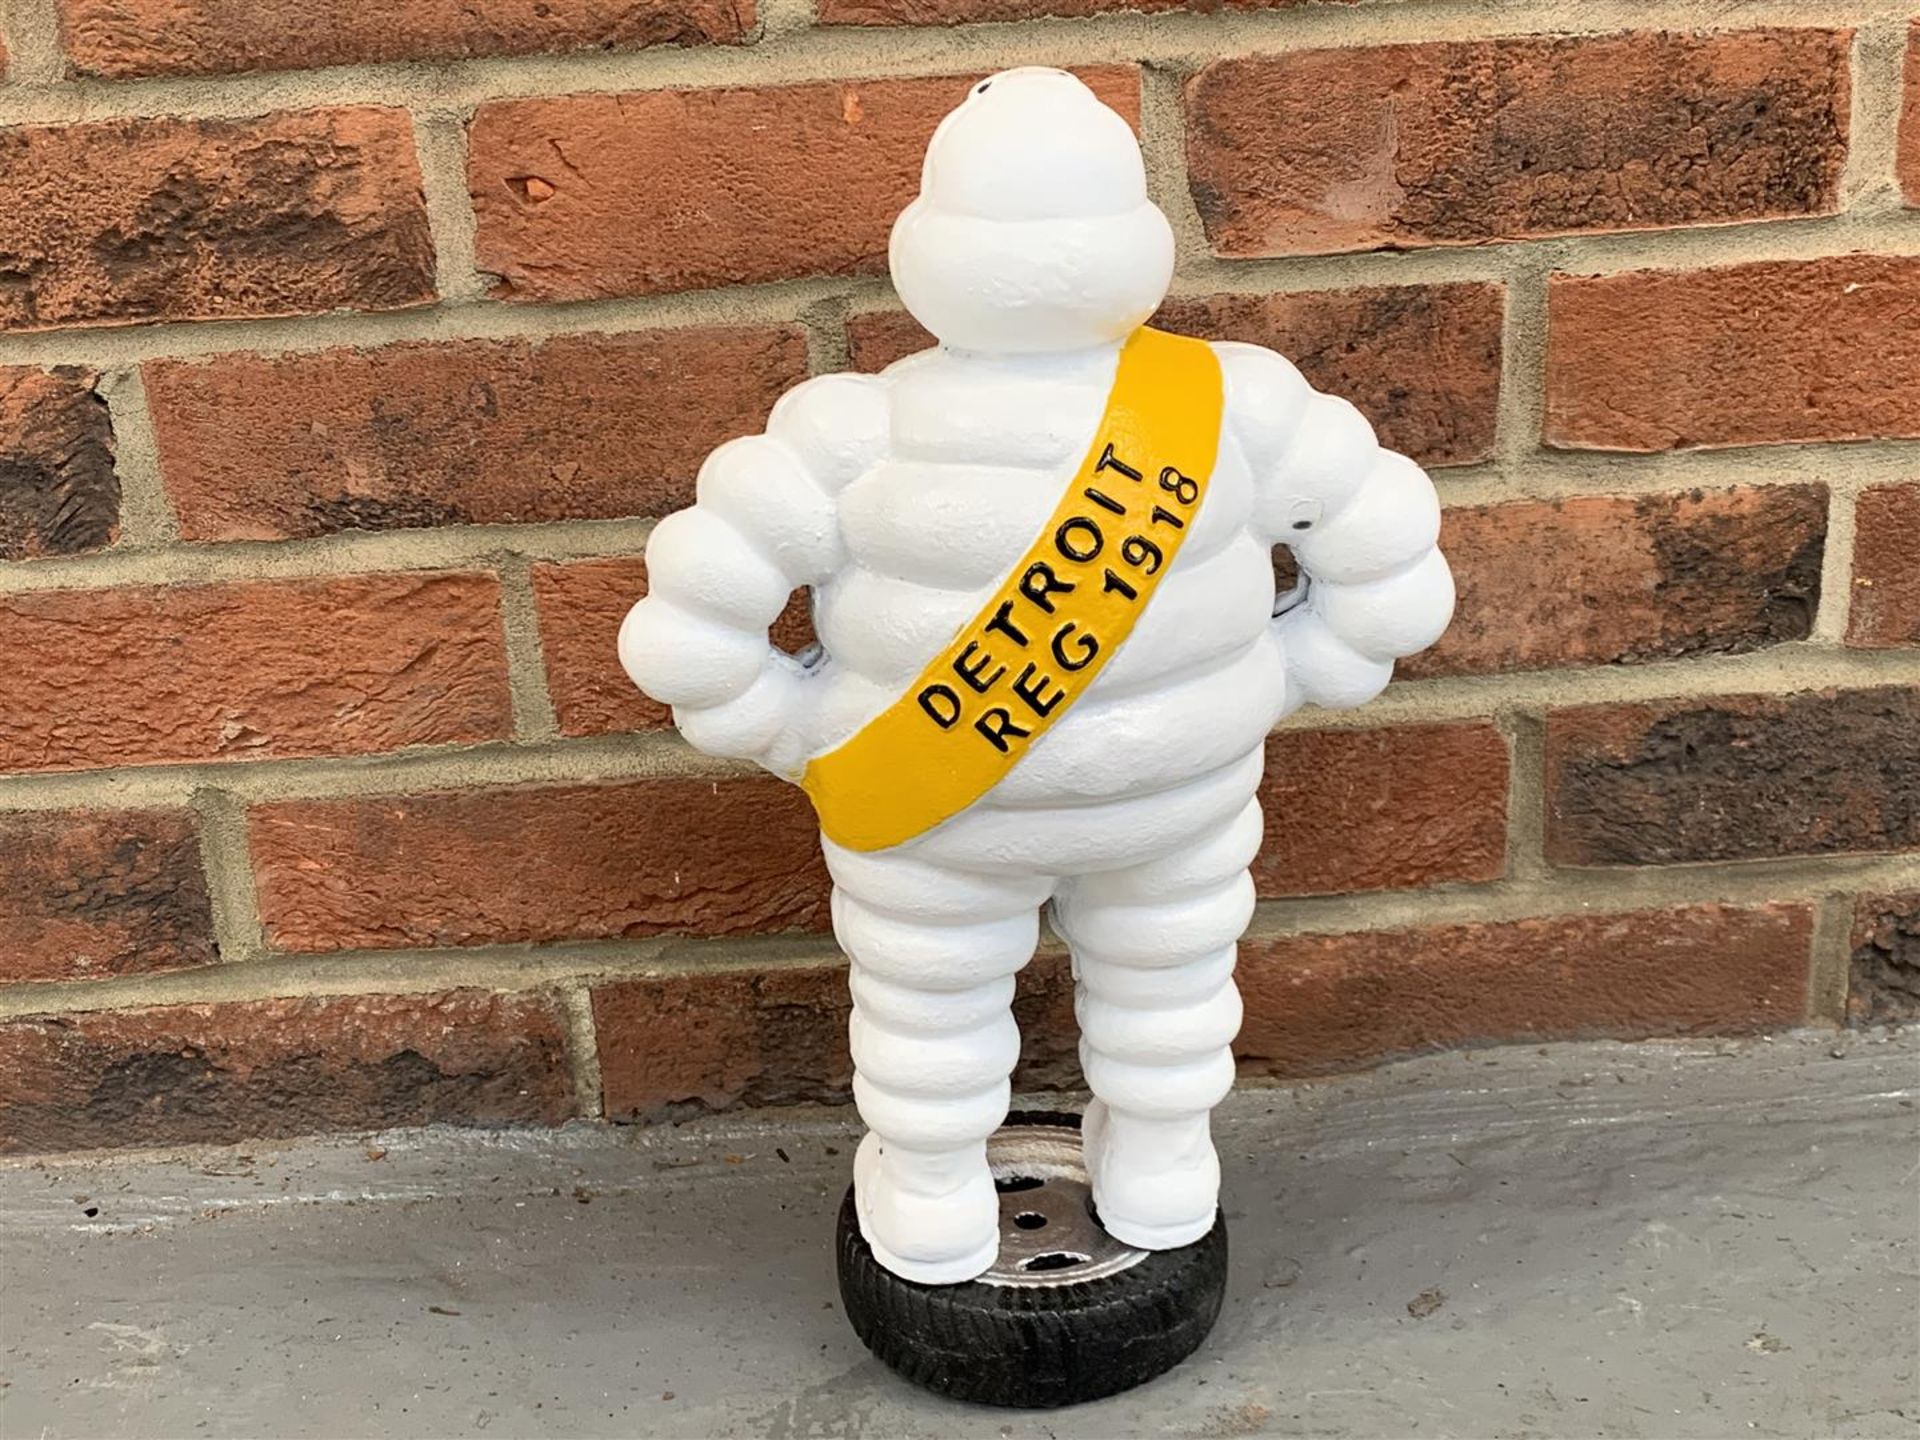 Cast Iron & Painted Michelin Man Display - Image 2 of 2